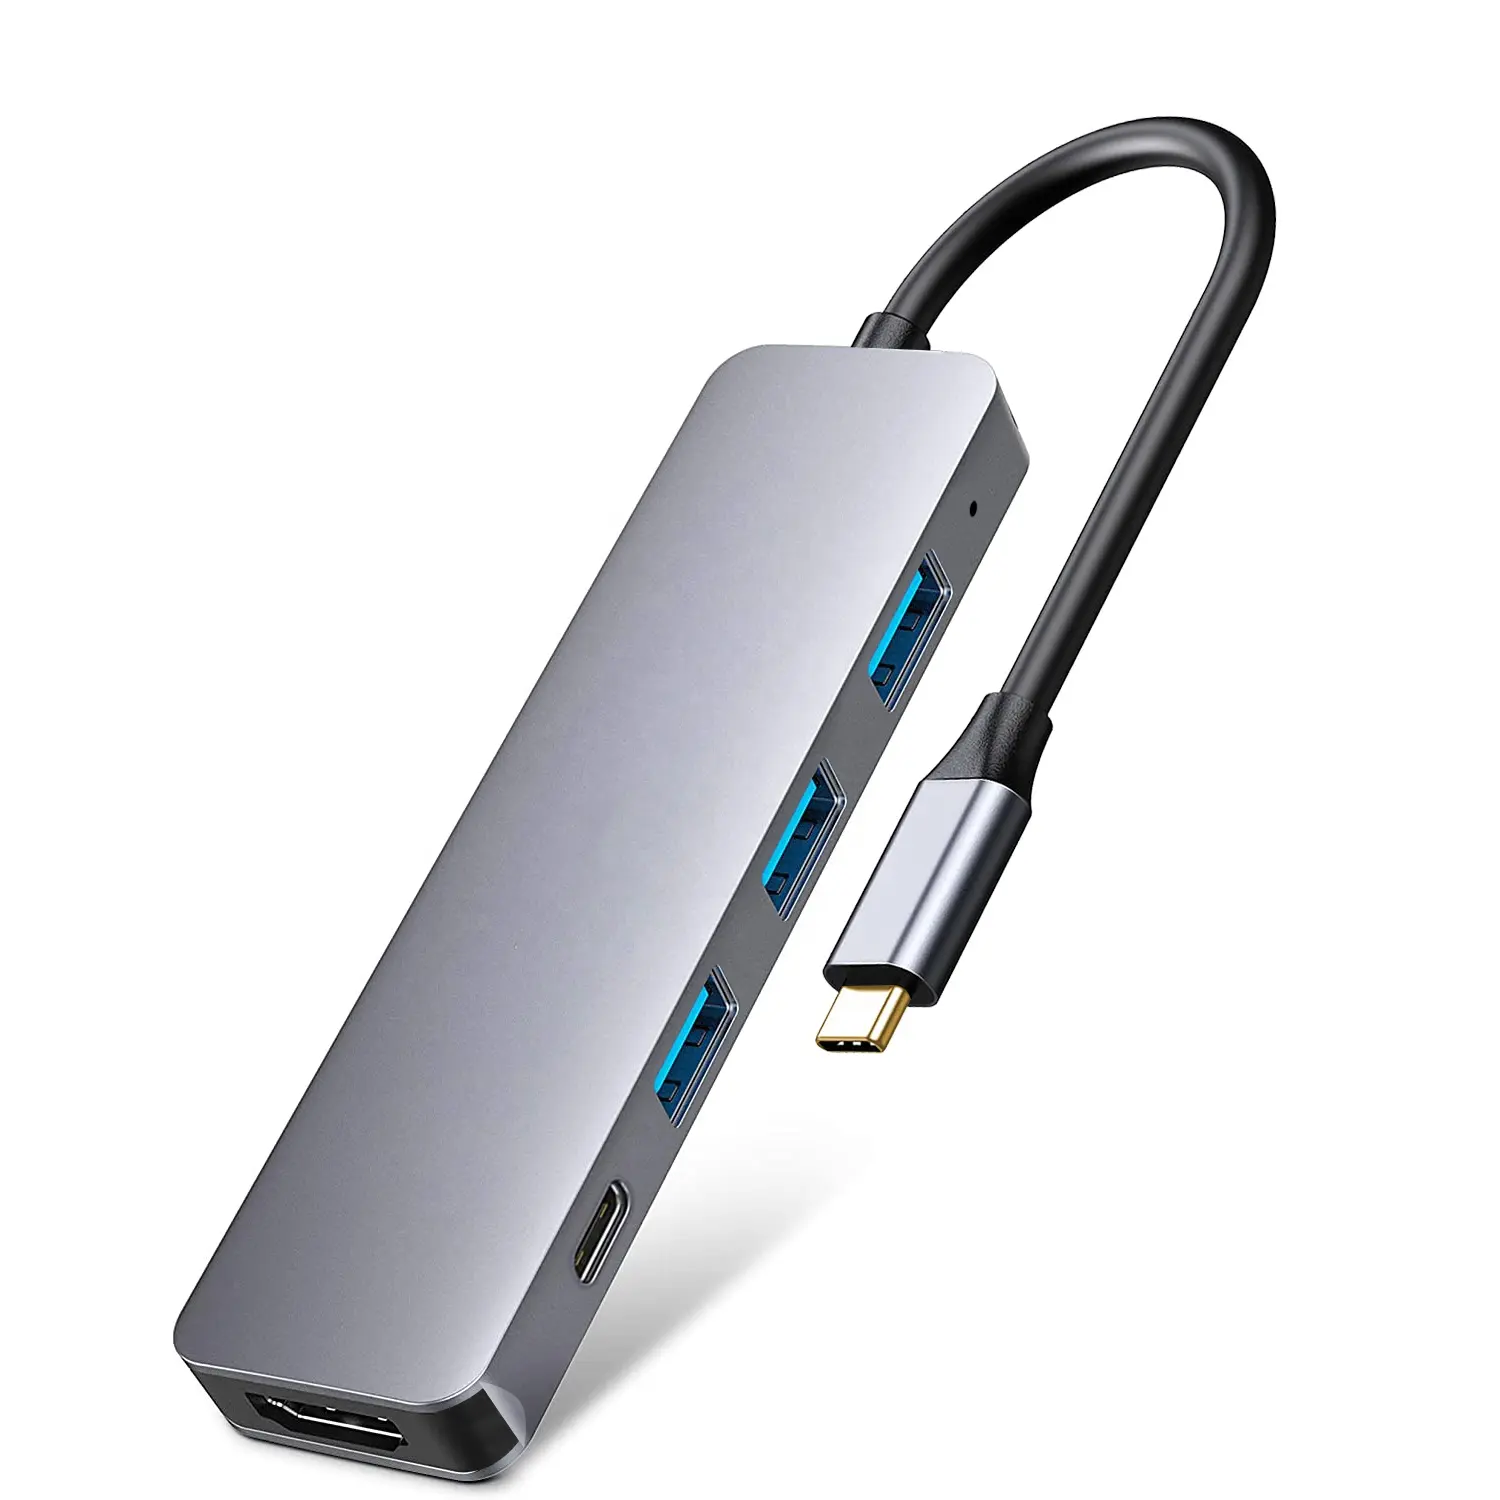 5 in 1 USB-C Thunderbolt 3 Hub to 4K HDMI Adapter USB 3.0 Port, 100W PD,Compatible with Mac Book Pro Air